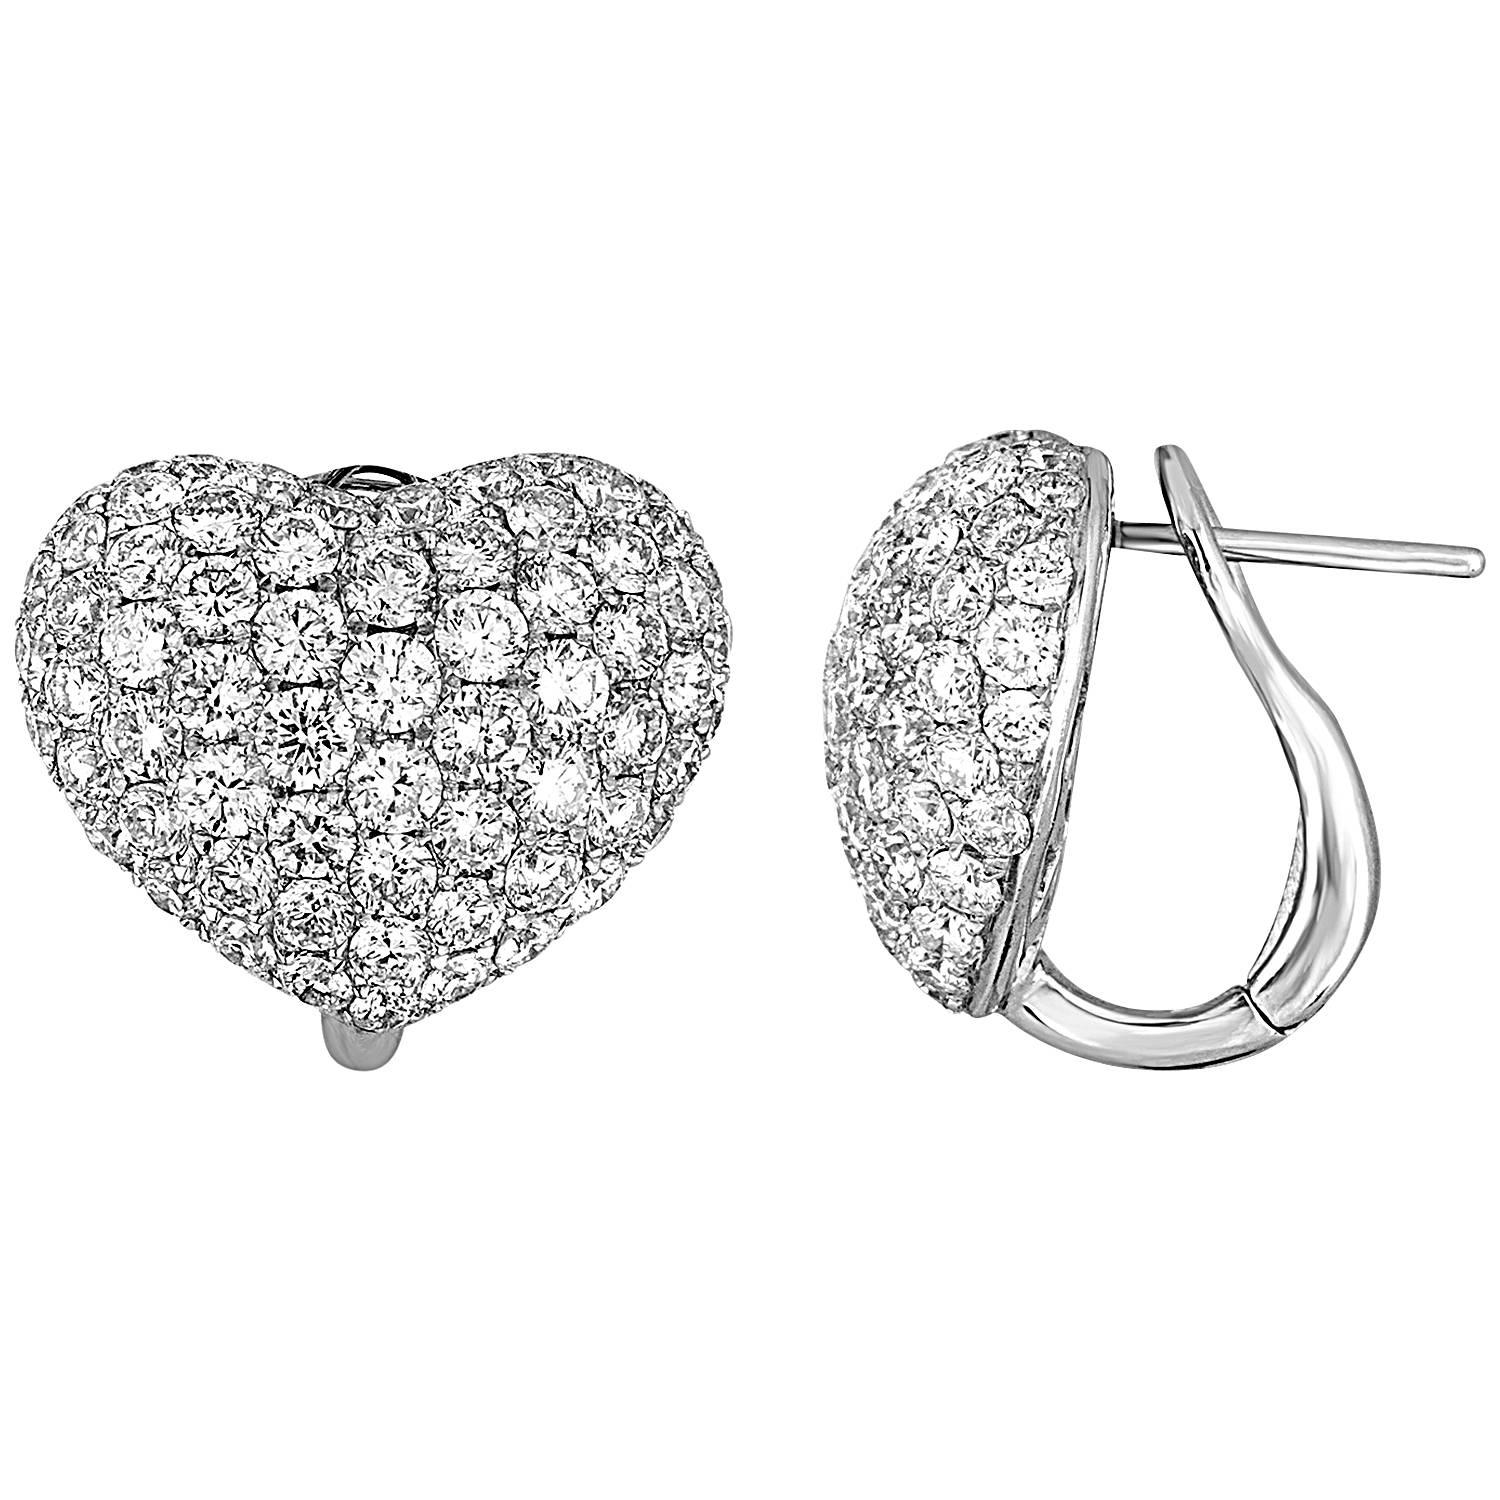 4.62 Carats Diamond Pave Gold Heart Earrings For Sale